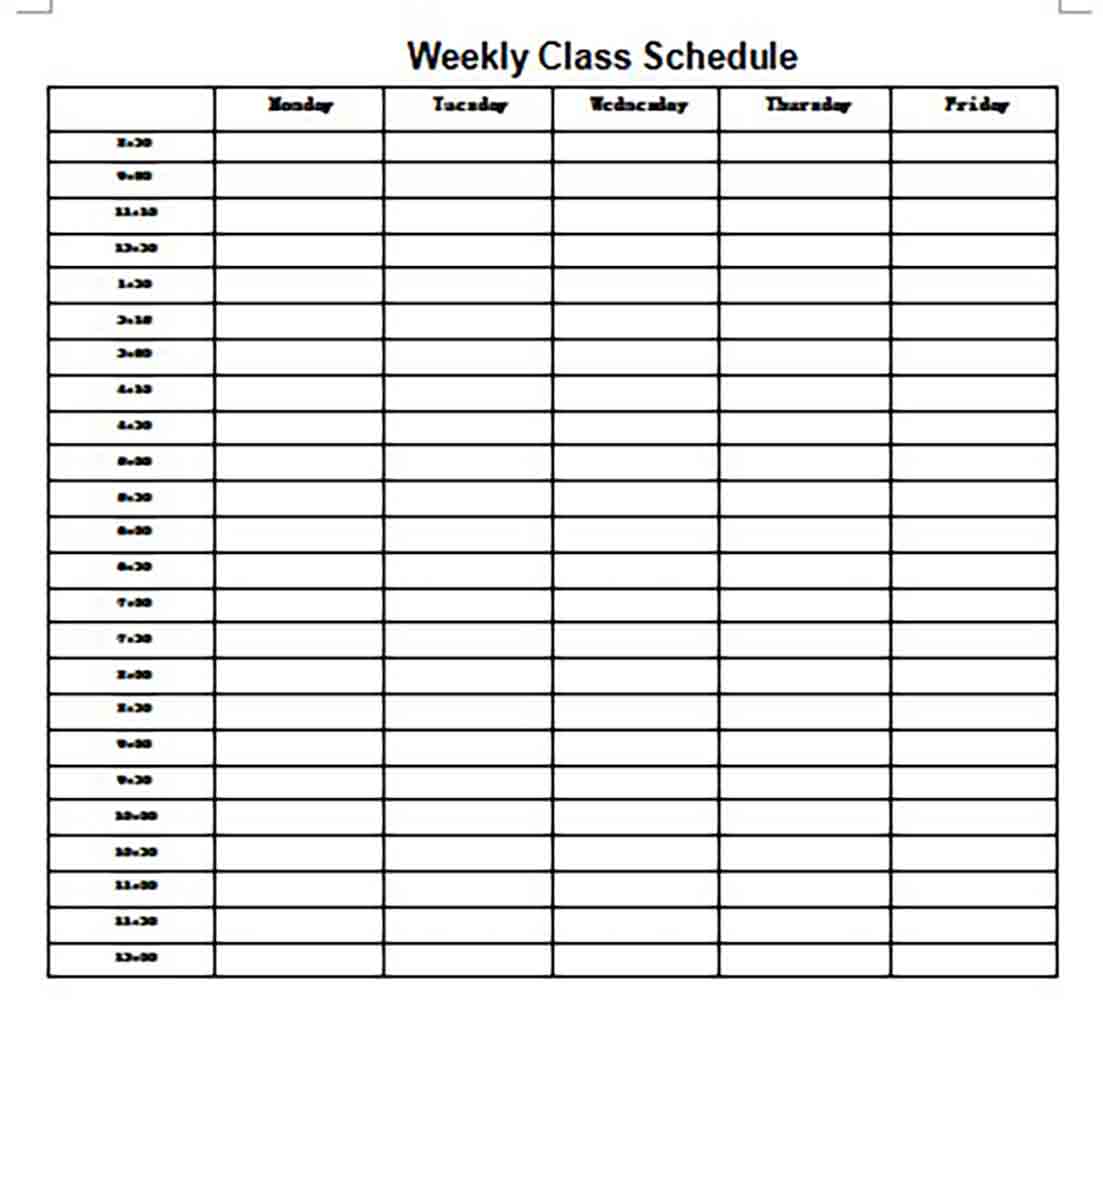 Printable Weekly Class Schedule templates